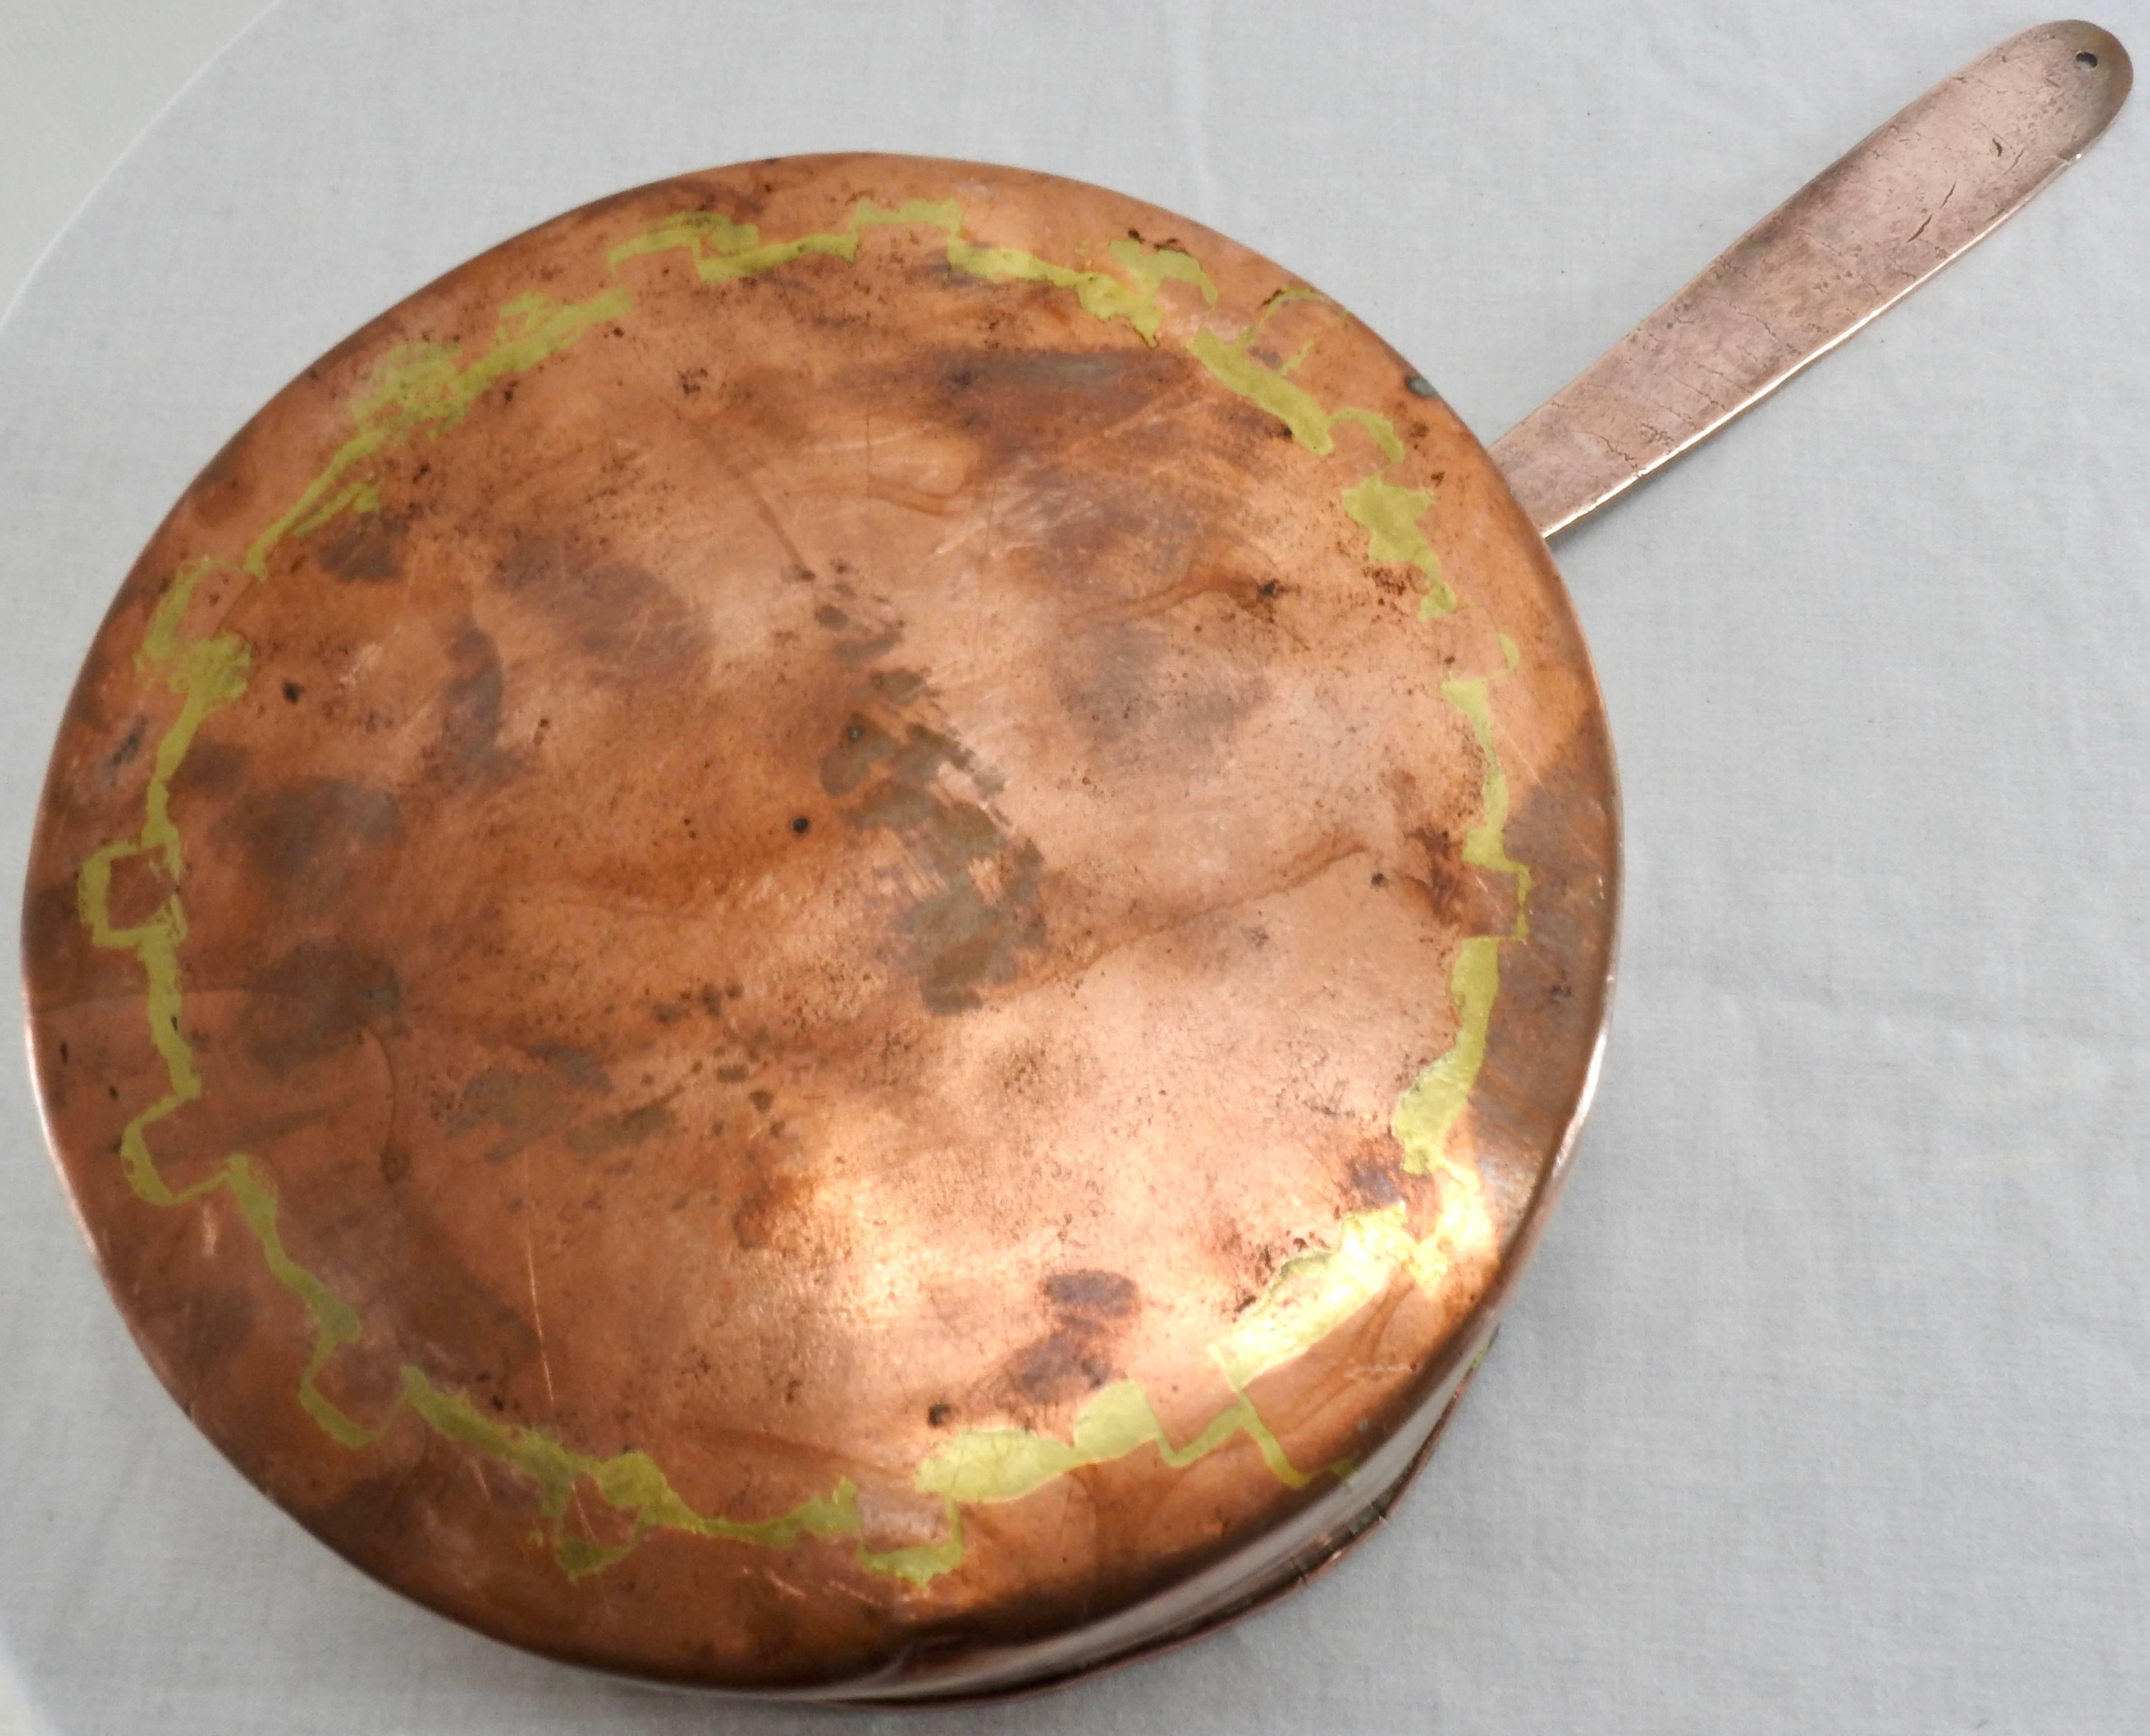 Medium size copper stock pan from France. Hand forged with dove tailing. Very heavy with a nice aged patina. Has the no. 11 on the bottom side of the handle.

Measures: Handle length 9.75.